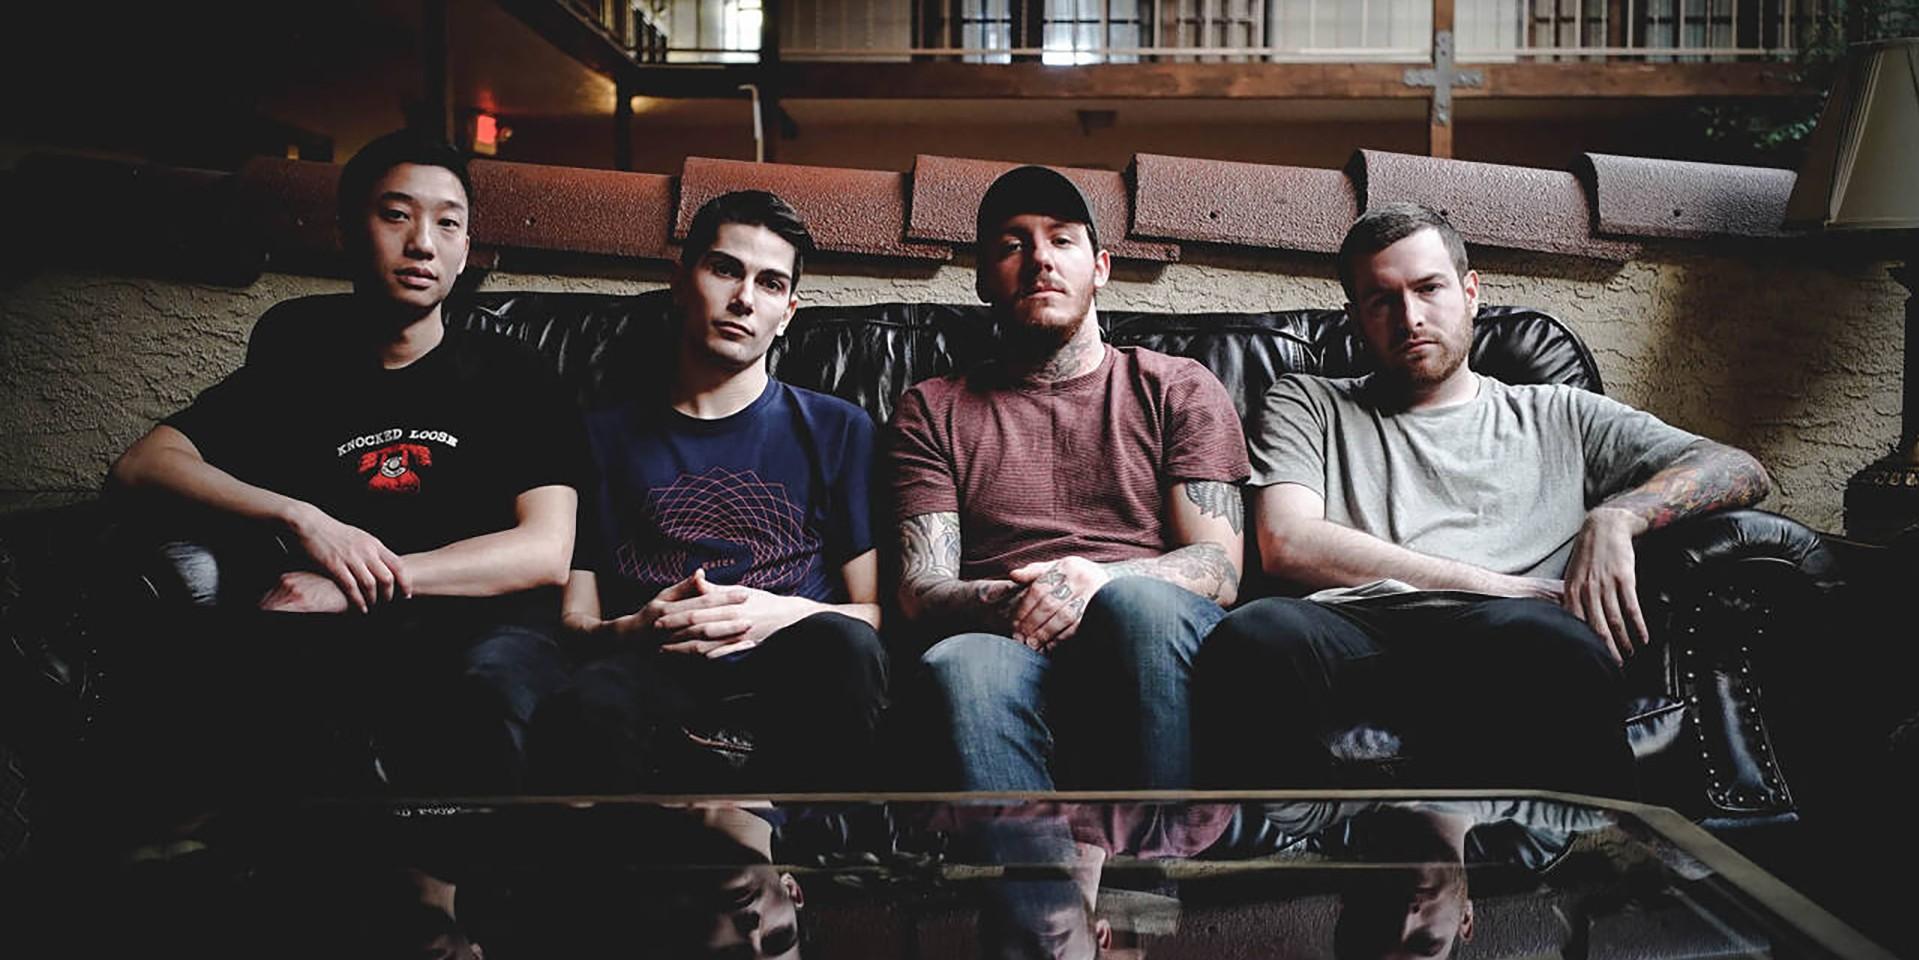 Counterparts Announce Private Room EP, CoHeadlining Tour with Being As